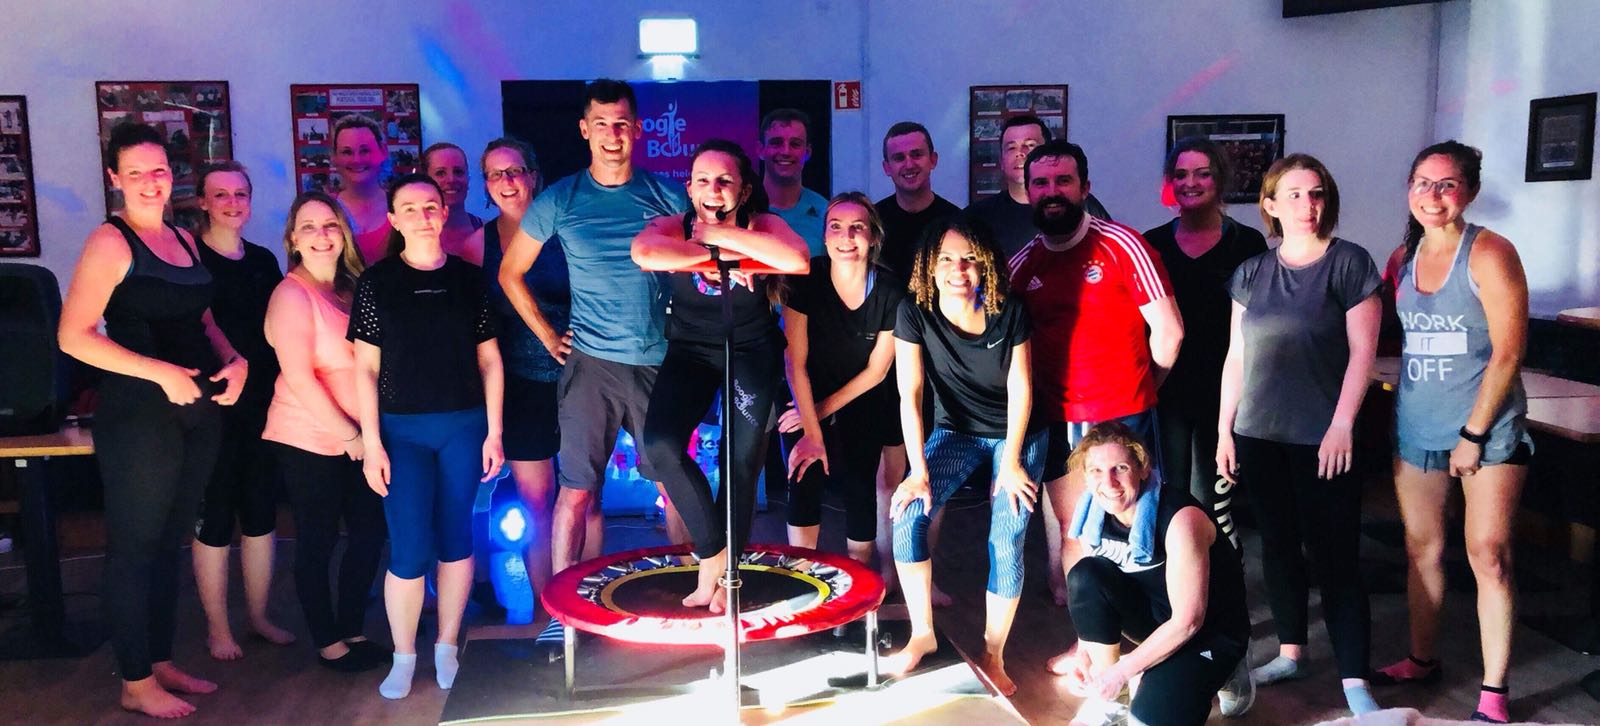 As part of EisnerAmper Ireland's 2018 summer charity initiative The Bouncers of Temple Street, on Tuesday 26 June 2018, EisnerAmper organised a Boogie Bounce class in aid of Temple Street Children's Hospital.